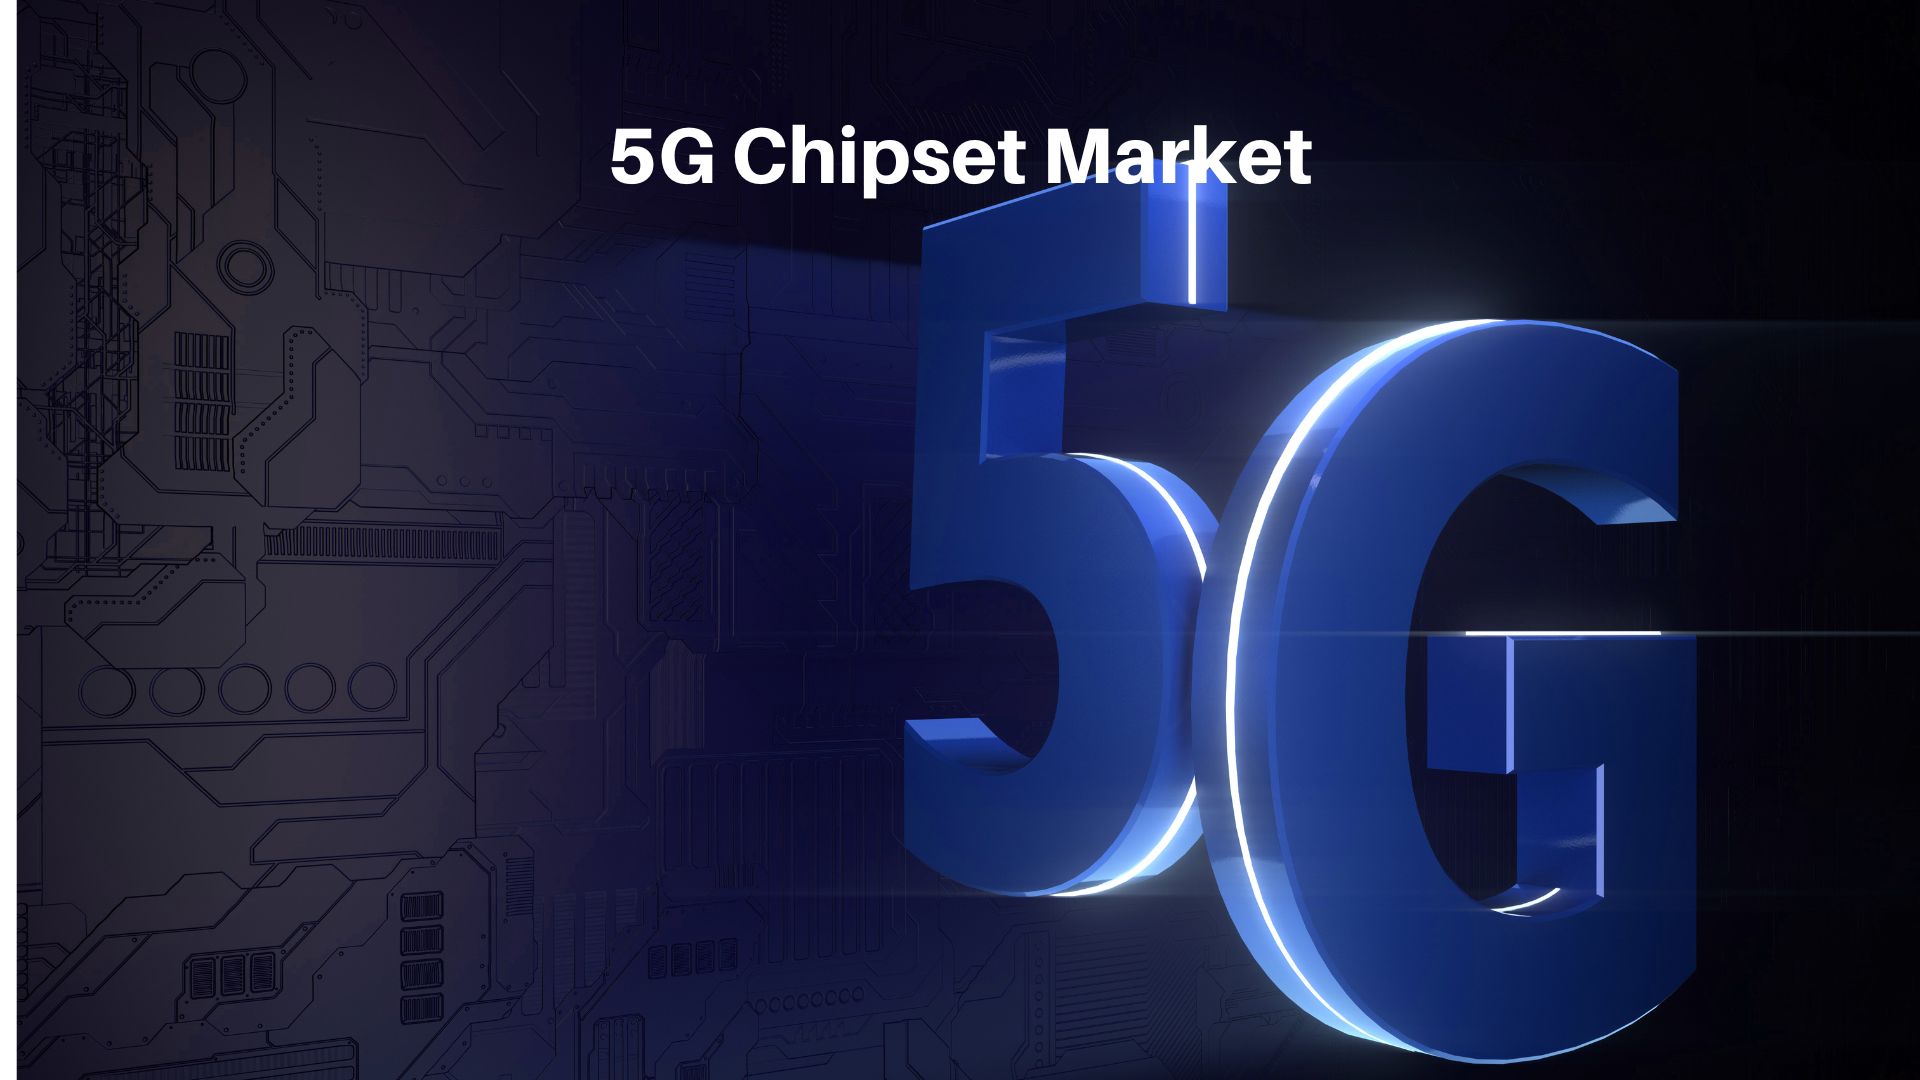 Global 5G Chipset Market size is expected to be worth around USD 140.39 Billion by 2032